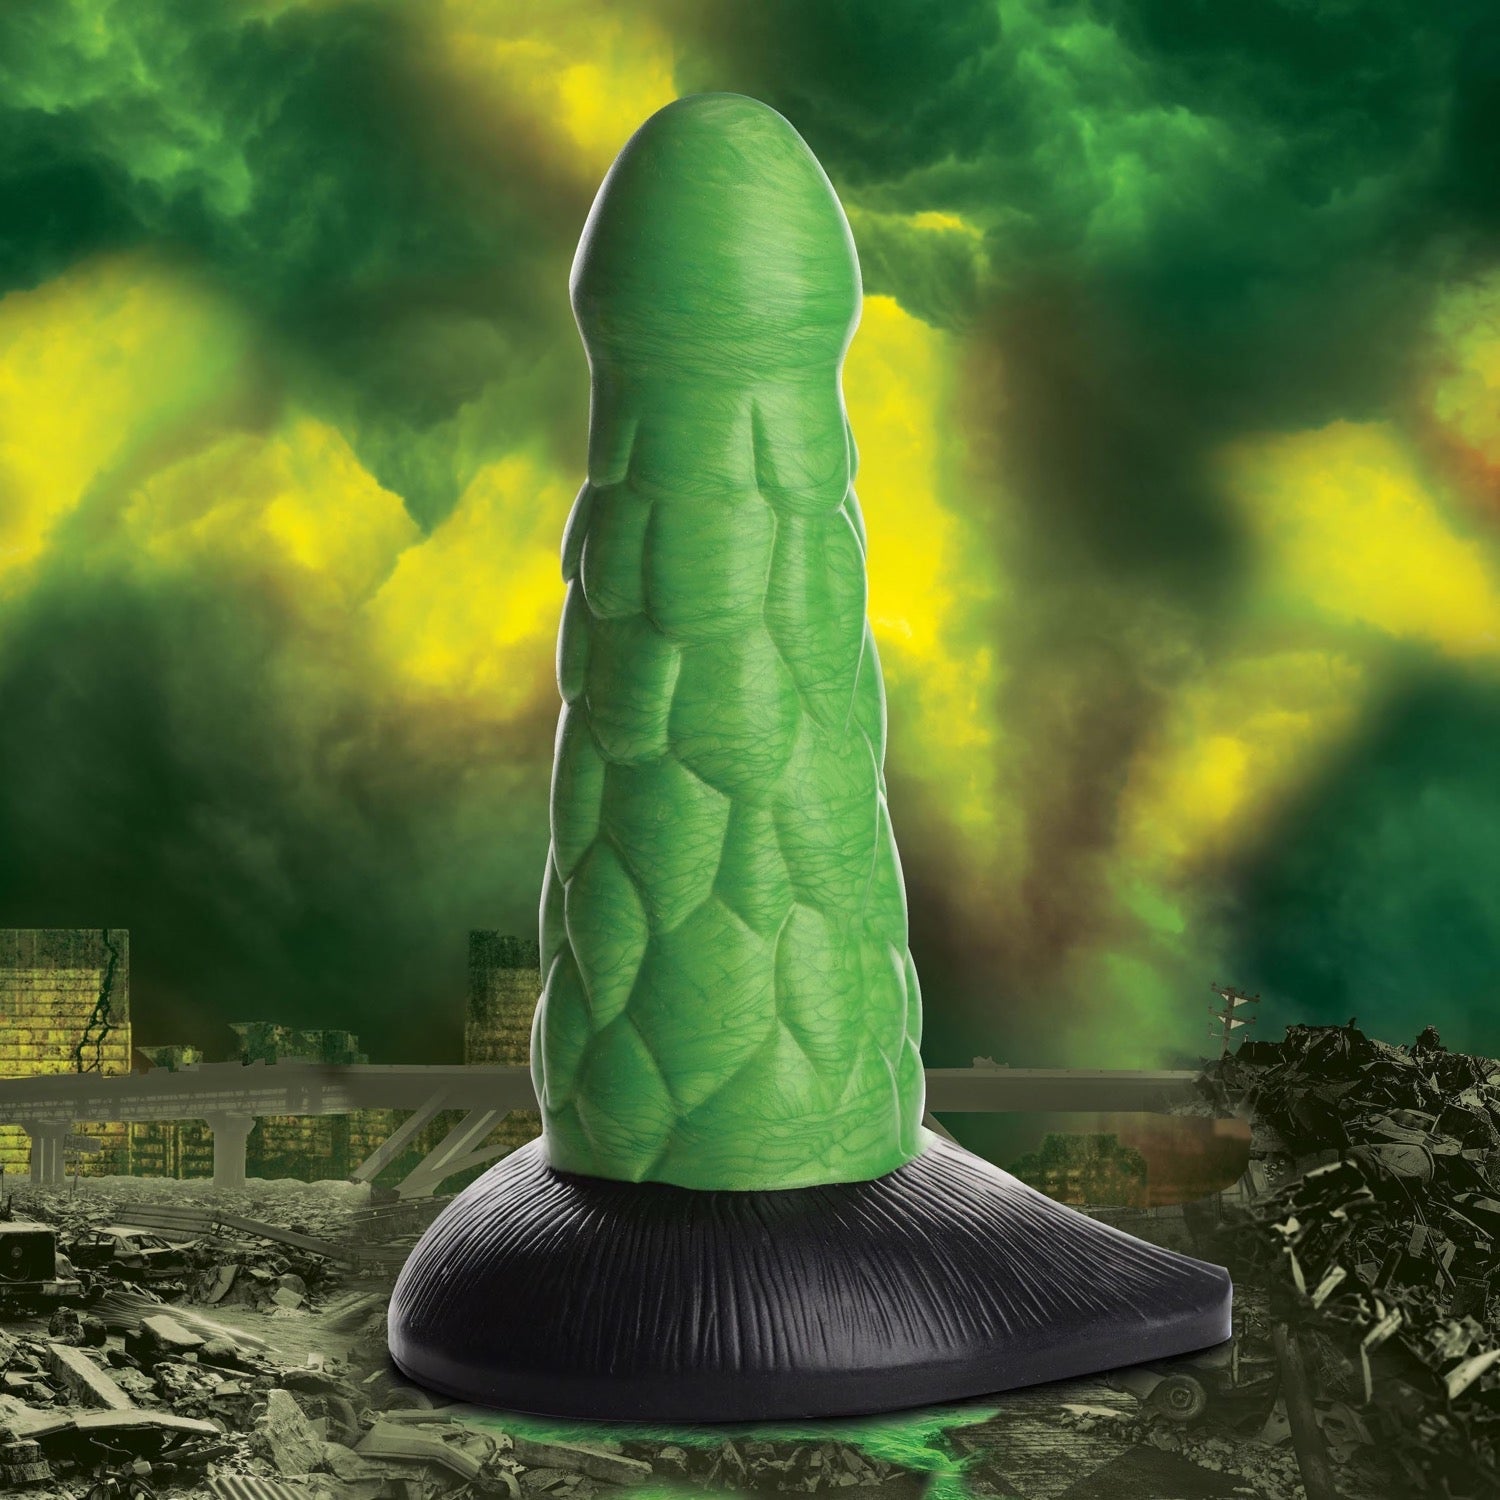 Creature Cocks Radioactive Reptile Thick Scaly Silicone 7.5&quot; Dildo by XR Brands